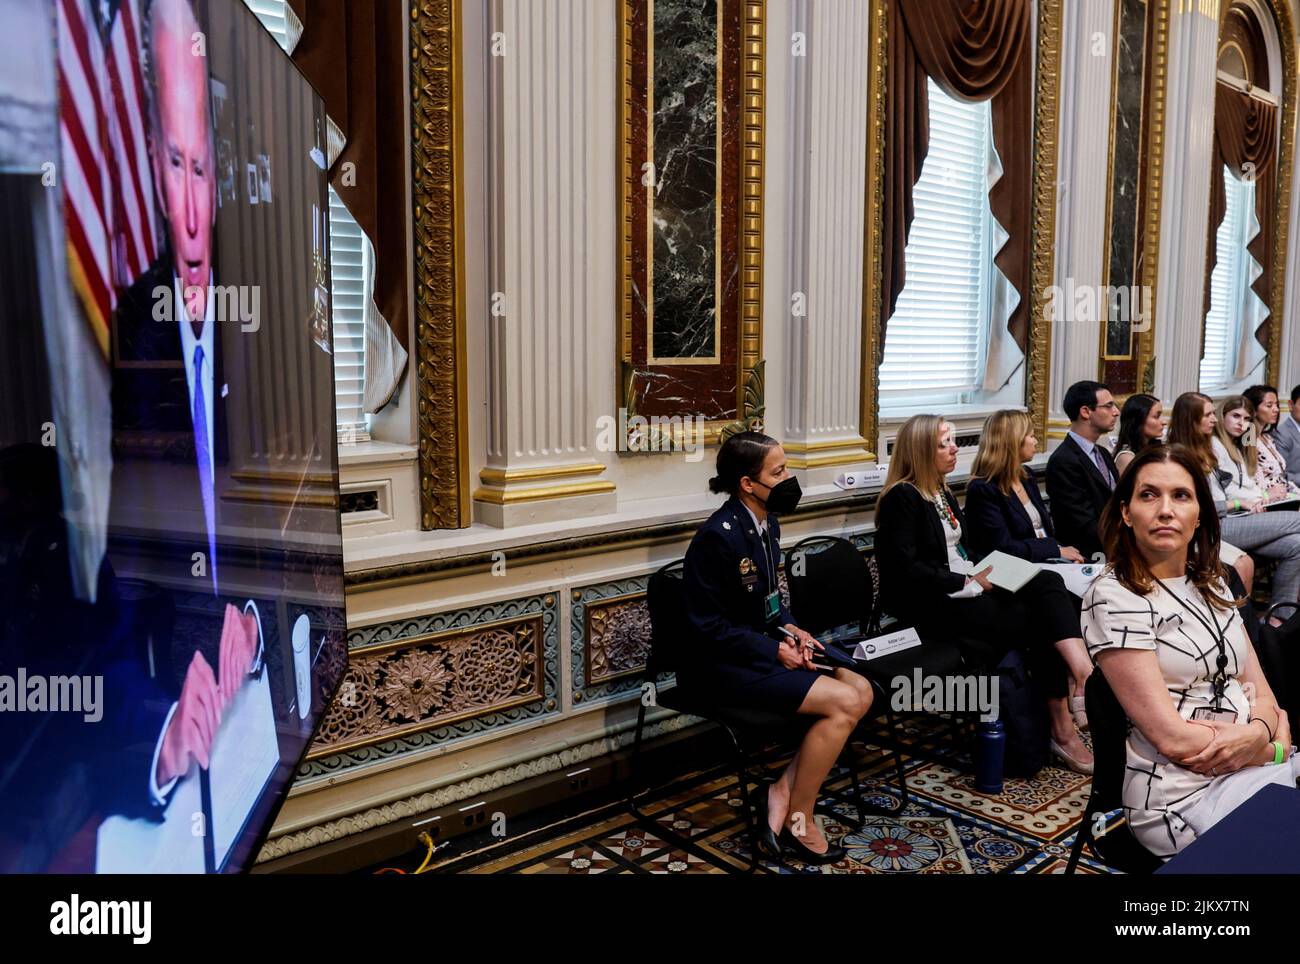 U.S. White House staff watch as U.S. President Joe Biden delivers remarks at a virtual event on securing access to reproductive and other health care services at the first meeting of the interagency Task Force on Reproductive Healthcare Access in the Indian Treaty Room in the Eisenhower Executive Office Building in Washington, U.S., August 3, 2022. REUTERS/Evelyn Hockstein Stock Photo